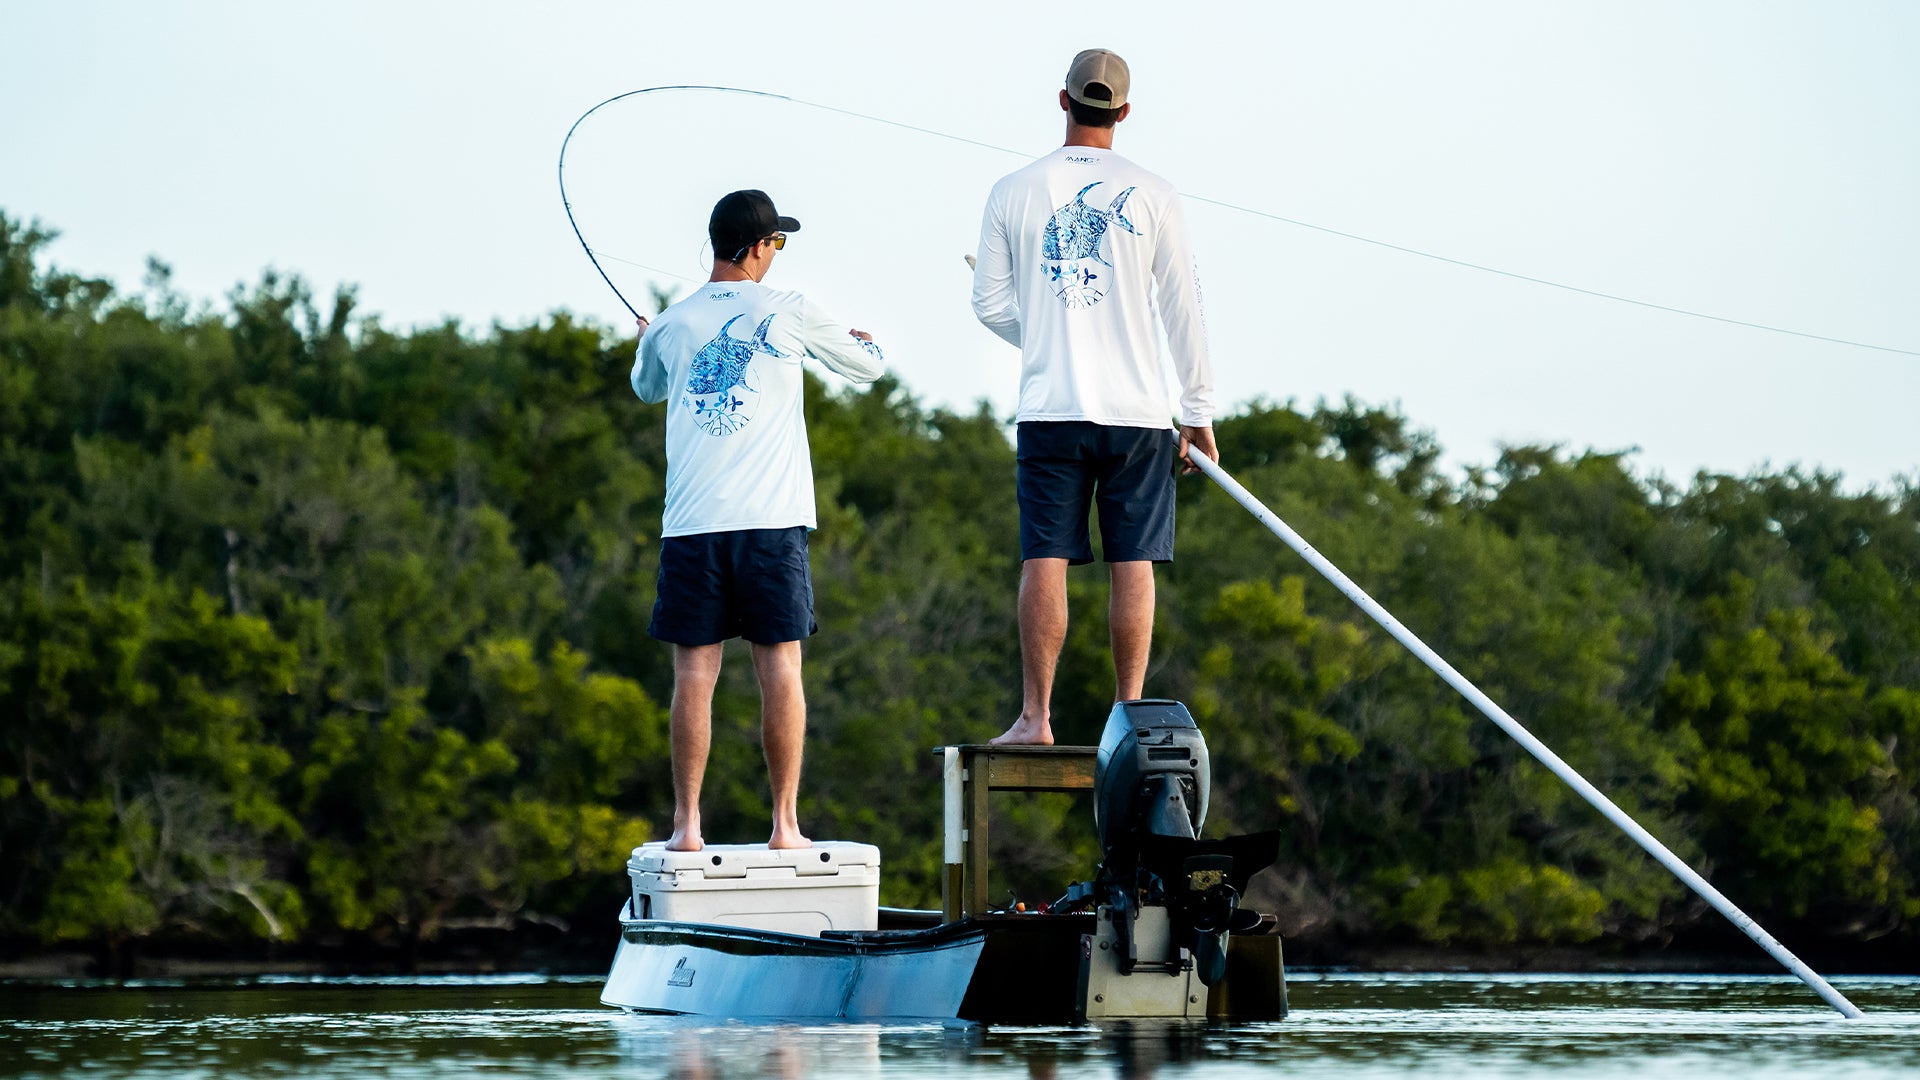 Two friends fishing together on a boat while wearing MANG longsleeve performance shirts